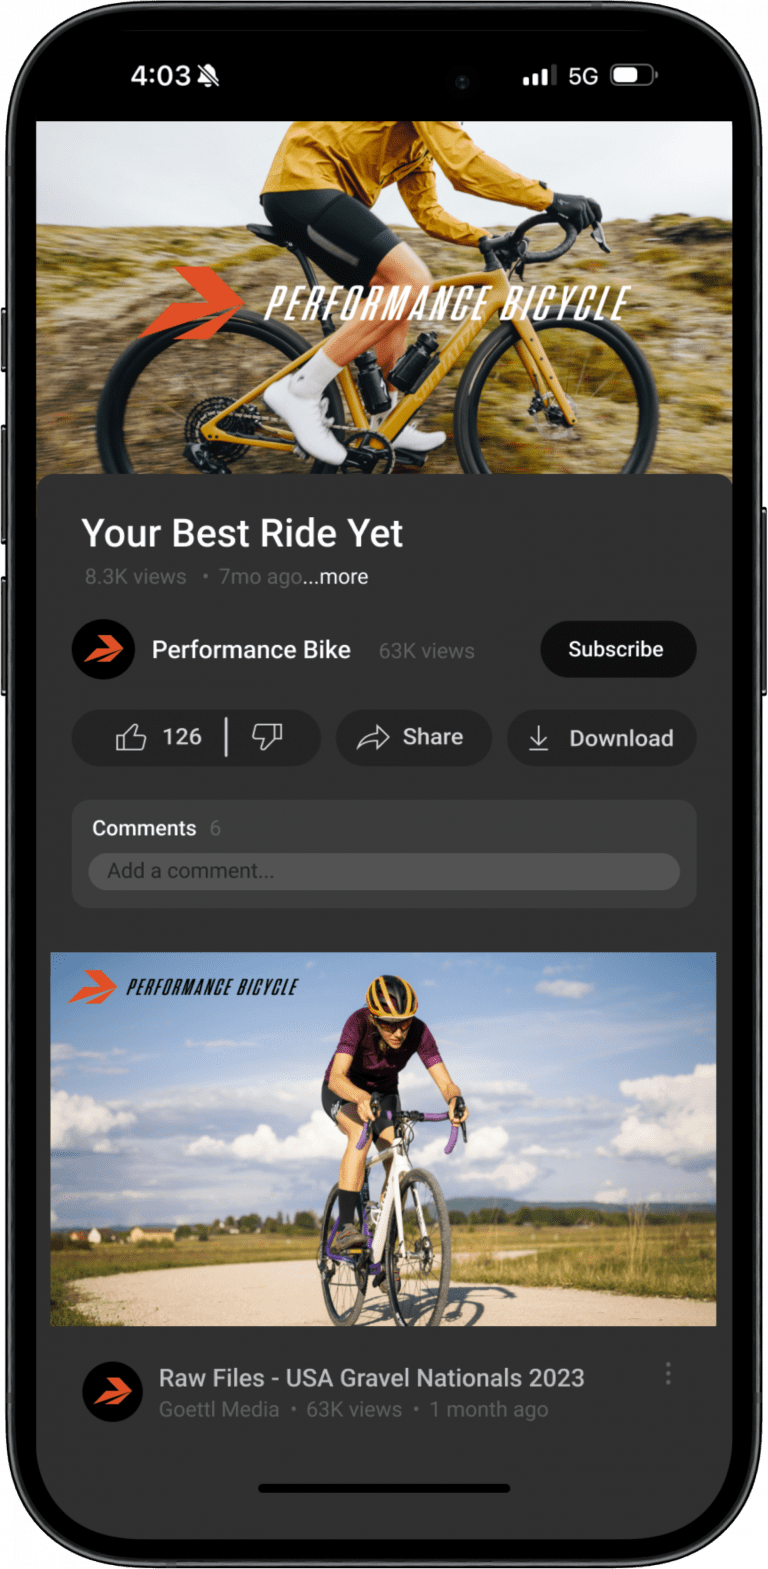 Performance Bicycle commercial featured on iPhone, focusing on digital outreach.